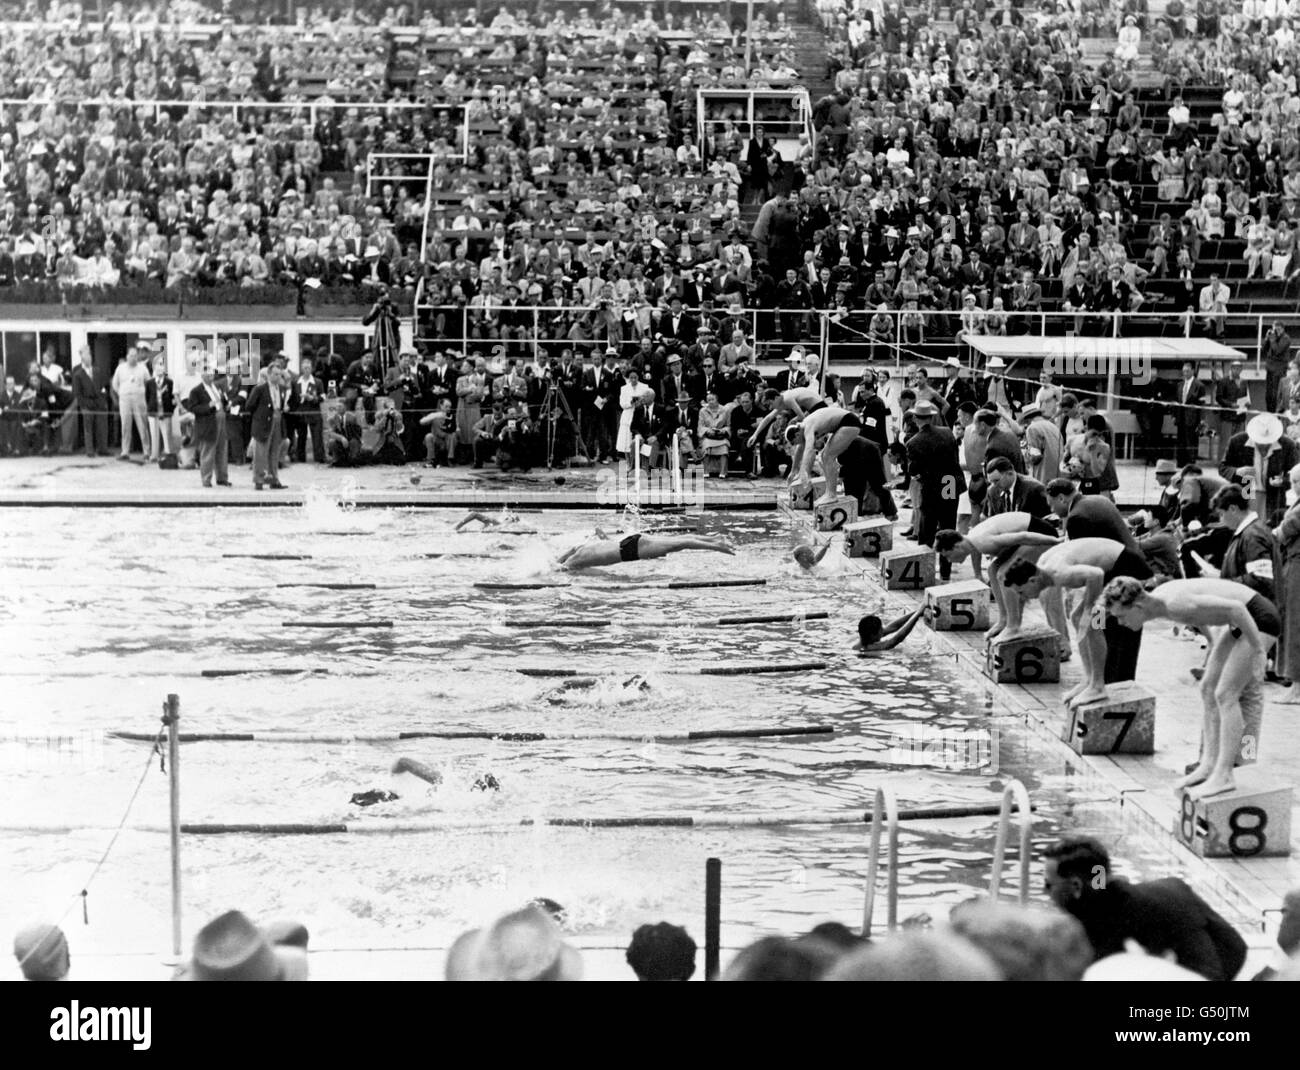 Swimming - Helsinki Olympic Games 1952 - Men's 4 x 200 Metres Freestyle Relay Final. The final of the men's 4 x 200 metres freestyle relay. USA won the gold medal, Japan the silver, and France the bronze. Stock Photo